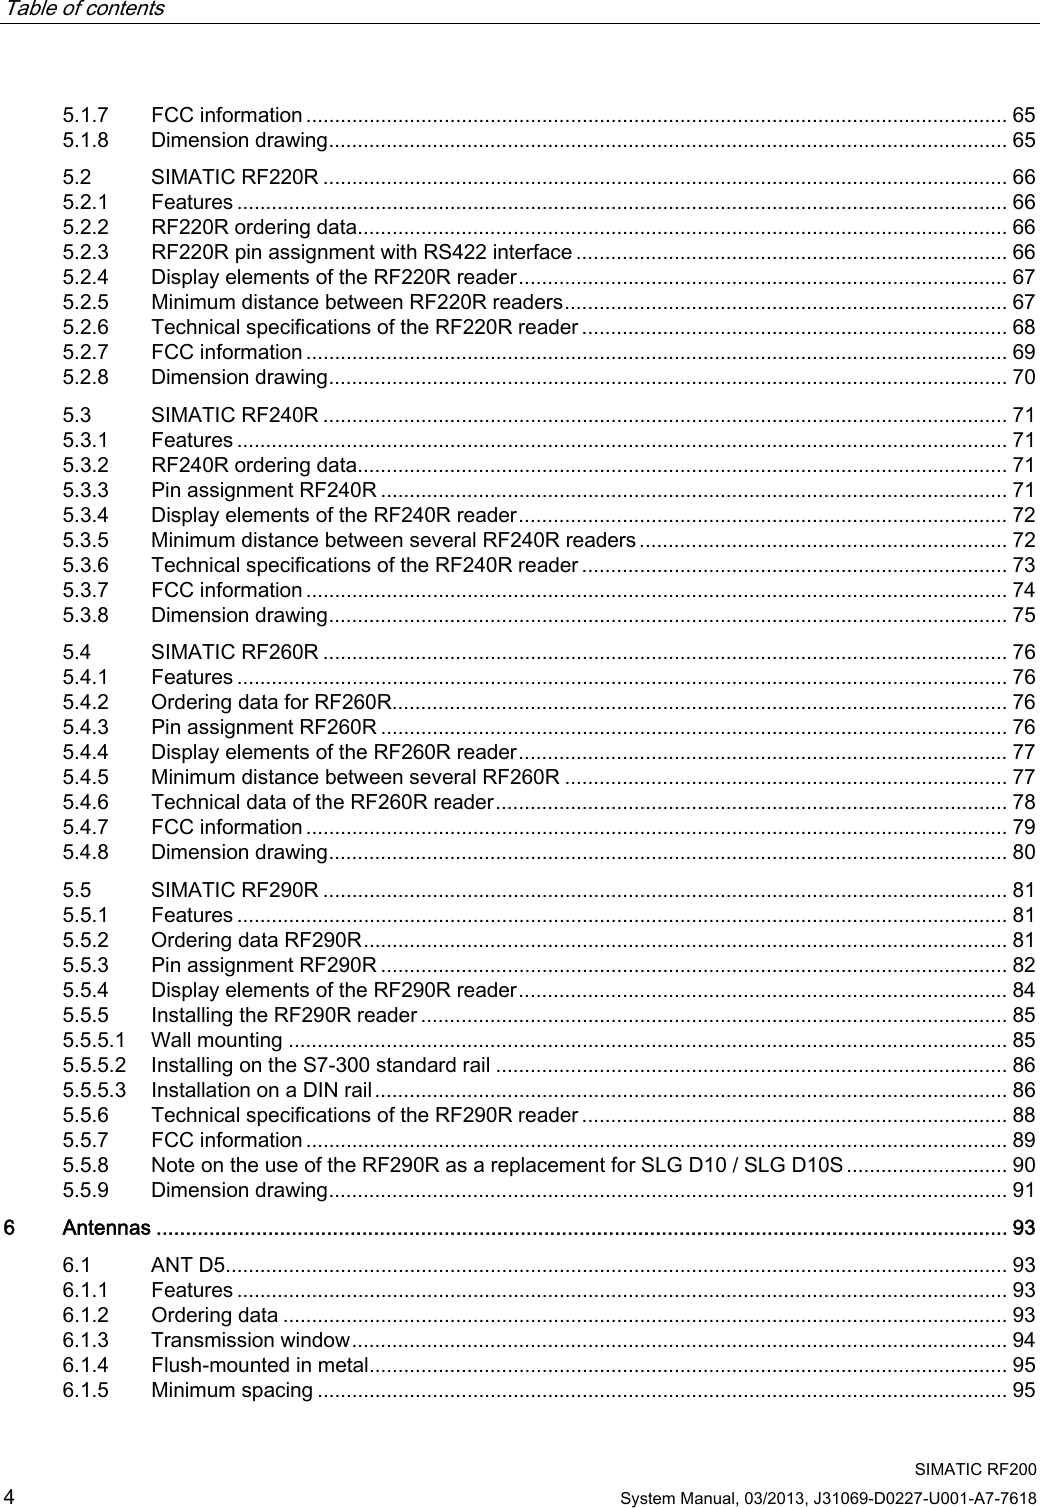 Table of contents      SIMATIC RF200 4 System Manual, 03/2013, J31069-D0227-U001-A7-7618 5.1.7  FCC information .......................................................................................................................... 65 5.1.8  Dimension drawing...................................................................................................................... 65 5.2  SIMATIC RF220R ....................................................................................................................... 66 5.2.1  Features ...................................................................................................................................... 66 5.2.2  RF220R ordering data................................................................................................................. 66 5.2.3  RF220R pin assignment with RS422 interface ........................................................................... 66 5.2.4  Display elements of the RF220R reader..................................................................................... 67 5.2.5  Minimum distance between RF220R readers............................................................................. 67 5.2.6  Technical specifications of the RF220R reader .......................................................................... 68 5.2.7  FCC information .......................................................................................................................... 69 5.2.8  Dimension drawing...................................................................................................................... 70 5.3  SIMATIC RF240R ....................................................................................................................... 71 5.3.1  Features ...................................................................................................................................... 71 5.3.2  RF240R ordering data................................................................................................................. 71 5.3.3  Pin assignment RF240R ............................................................................................................. 71 5.3.4  Display elements of the RF240R reader..................................................................................... 72 5.3.5  Minimum distance between several RF240R readers ................................................................ 72 5.3.6  Technical specifications of the RF240R reader .......................................................................... 73 5.3.7  FCC information .......................................................................................................................... 74 5.3.8  Dimension drawing...................................................................................................................... 75 5.4  SIMATIC RF260R ....................................................................................................................... 76 5.4.1  Features ...................................................................................................................................... 76 5.4.2  Ordering data for RF260R........................................................................................................... 76 5.4.3  Pin assignment RF260R ............................................................................................................. 76 5.4.4  Display elements of the RF260R reader..................................................................................... 77 5.4.5  Minimum distance between several RF260R ............................................................................. 77 5.4.6  Technical data of the RF260R reader......................................................................................... 78 5.4.7  FCC information .......................................................................................................................... 79 5.4.8  Dimension drawing...................................................................................................................... 80 5.5  SIMATIC RF290R ....................................................................................................................... 81 5.5.1  Features ...................................................................................................................................... 81 5.5.2  Ordering data RF290R................................................................................................................ 81 5.5.3  Pin assignment RF290R ............................................................................................................. 82 5.5.4  Display elements of the RF290R reader..................................................................................... 84 5.5.5  Installing the RF290R reader ...................................................................................................... 85 5.5.5.1  Wall mounting ............................................................................................................................. 85 5.5.5.2  Installing on the S7-300 standard rail ......................................................................................... 86 5.5.5.3  Installation on a DIN rail.............................................................................................................. 86 5.5.6  Technical specifications of the RF290R reader .......................................................................... 88 5.5.7  FCC information .......................................................................................................................... 89 5.5.8  Note on the use of the RF290R as a replacement for SLG D10 / SLG D10S............................ 90 5.5.9  Dimension drawing...................................................................................................................... 91 6  Antennas ................................................................................................................................................. 93 6.1  ANT D5........................................................................................................................................ 93 6.1.1  Features ...................................................................................................................................... 93 6.1.2  Ordering data .............................................................................................................................. 93 6.1.3  Transmission window.................................................................................................................. 94 6.1.4  Flush-mounted in metal............................................................................................................... 95 6.1.5  Minimum spacing ........................................................................................................................ 95 